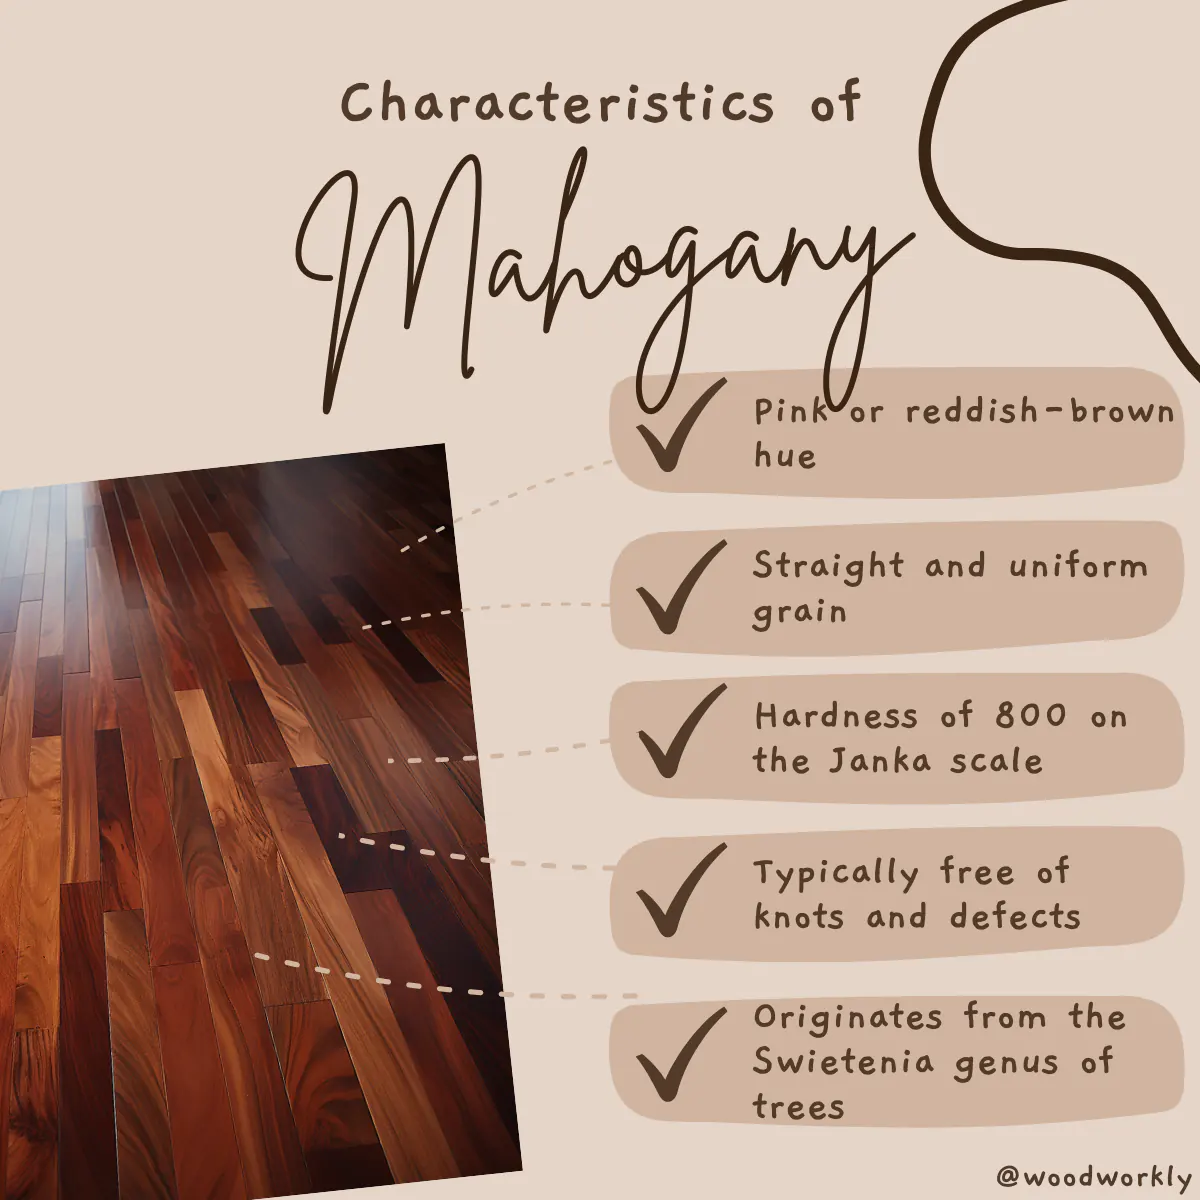 Characteristic features of Mahogany